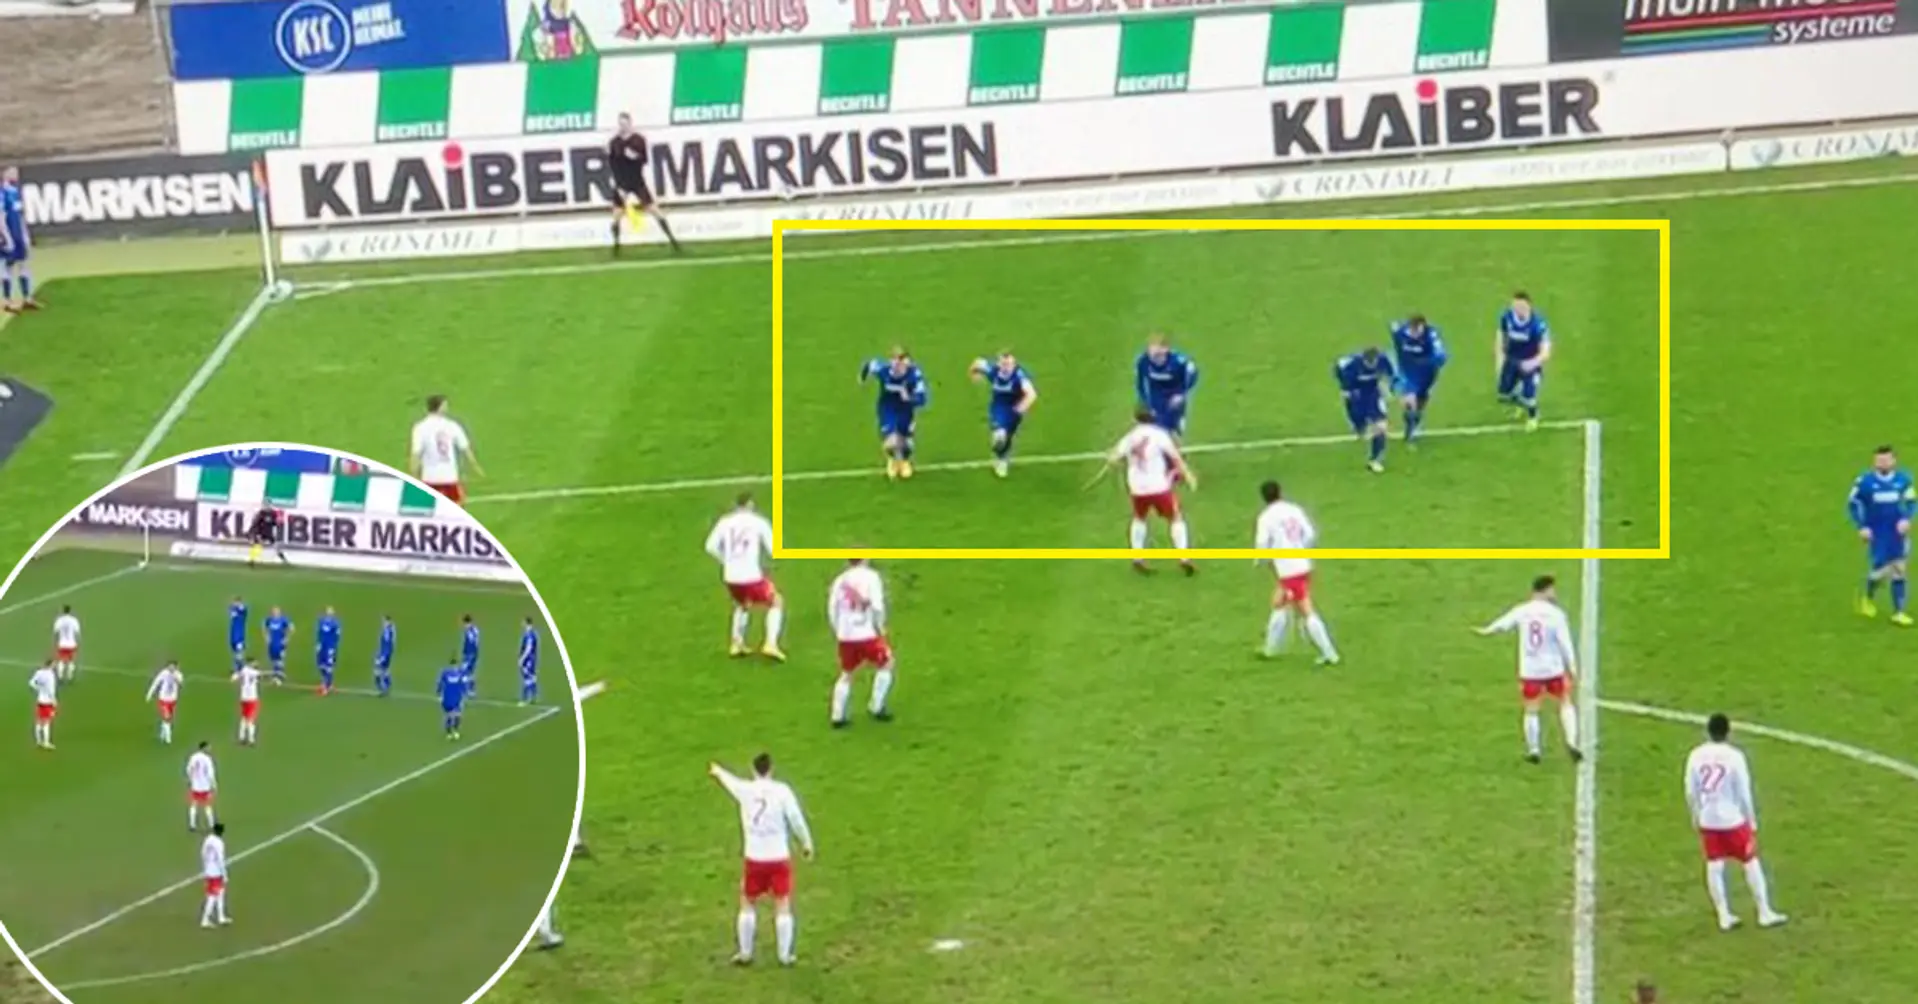 German team Karlsruher stun opponents with unexpected and creative corner kick routine